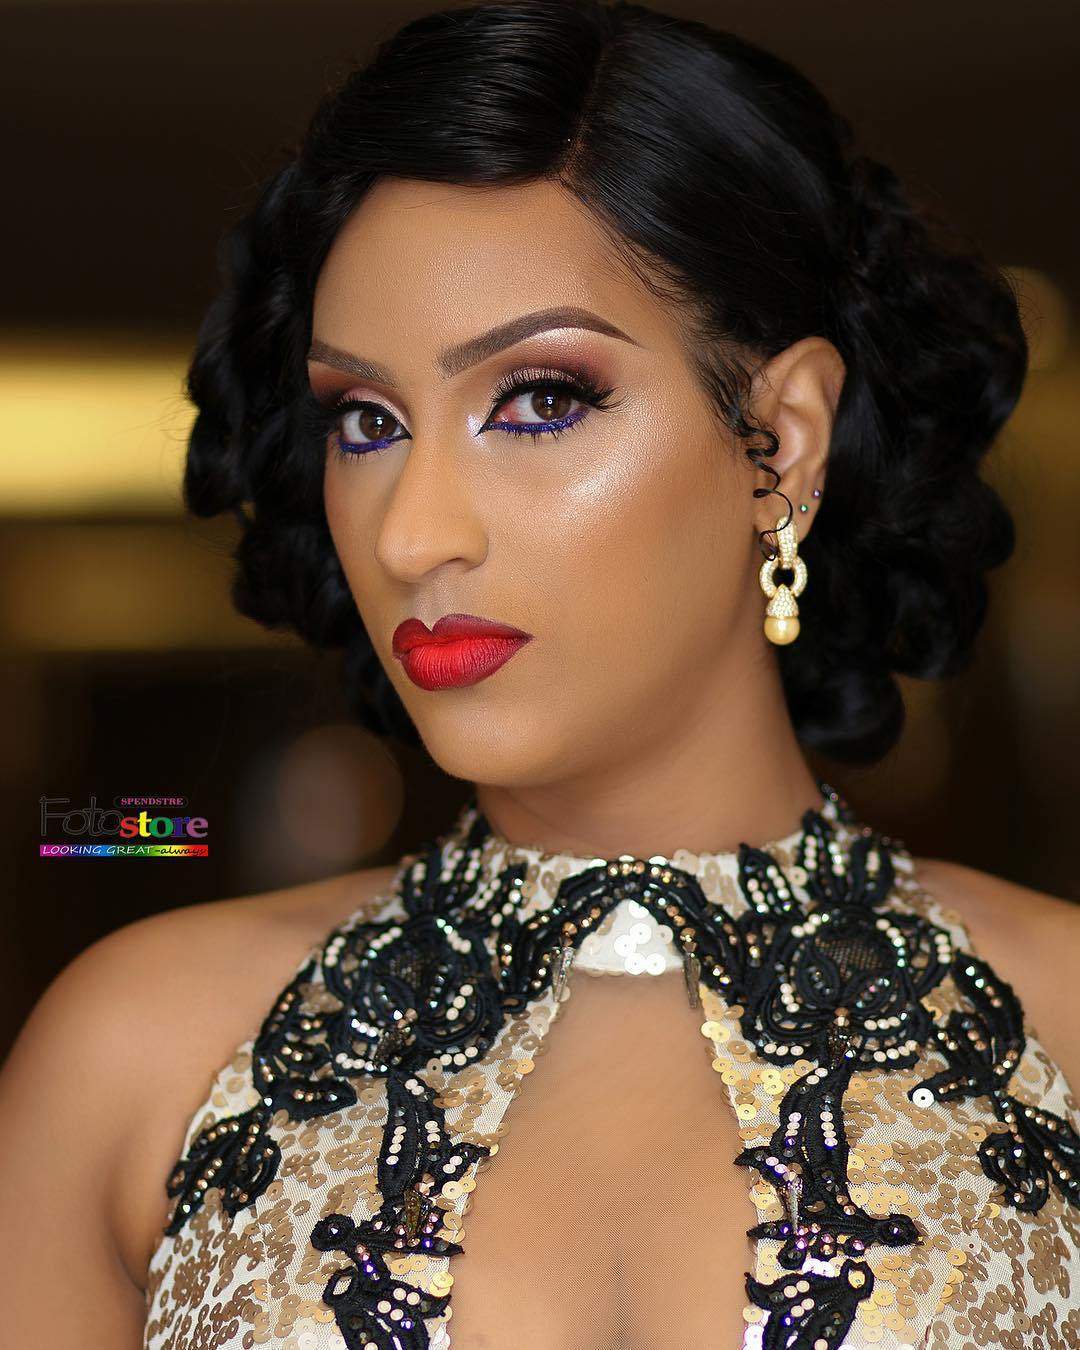 'I have been called 'k legs' mocked and ridiculed' - Juliet Ibrahim